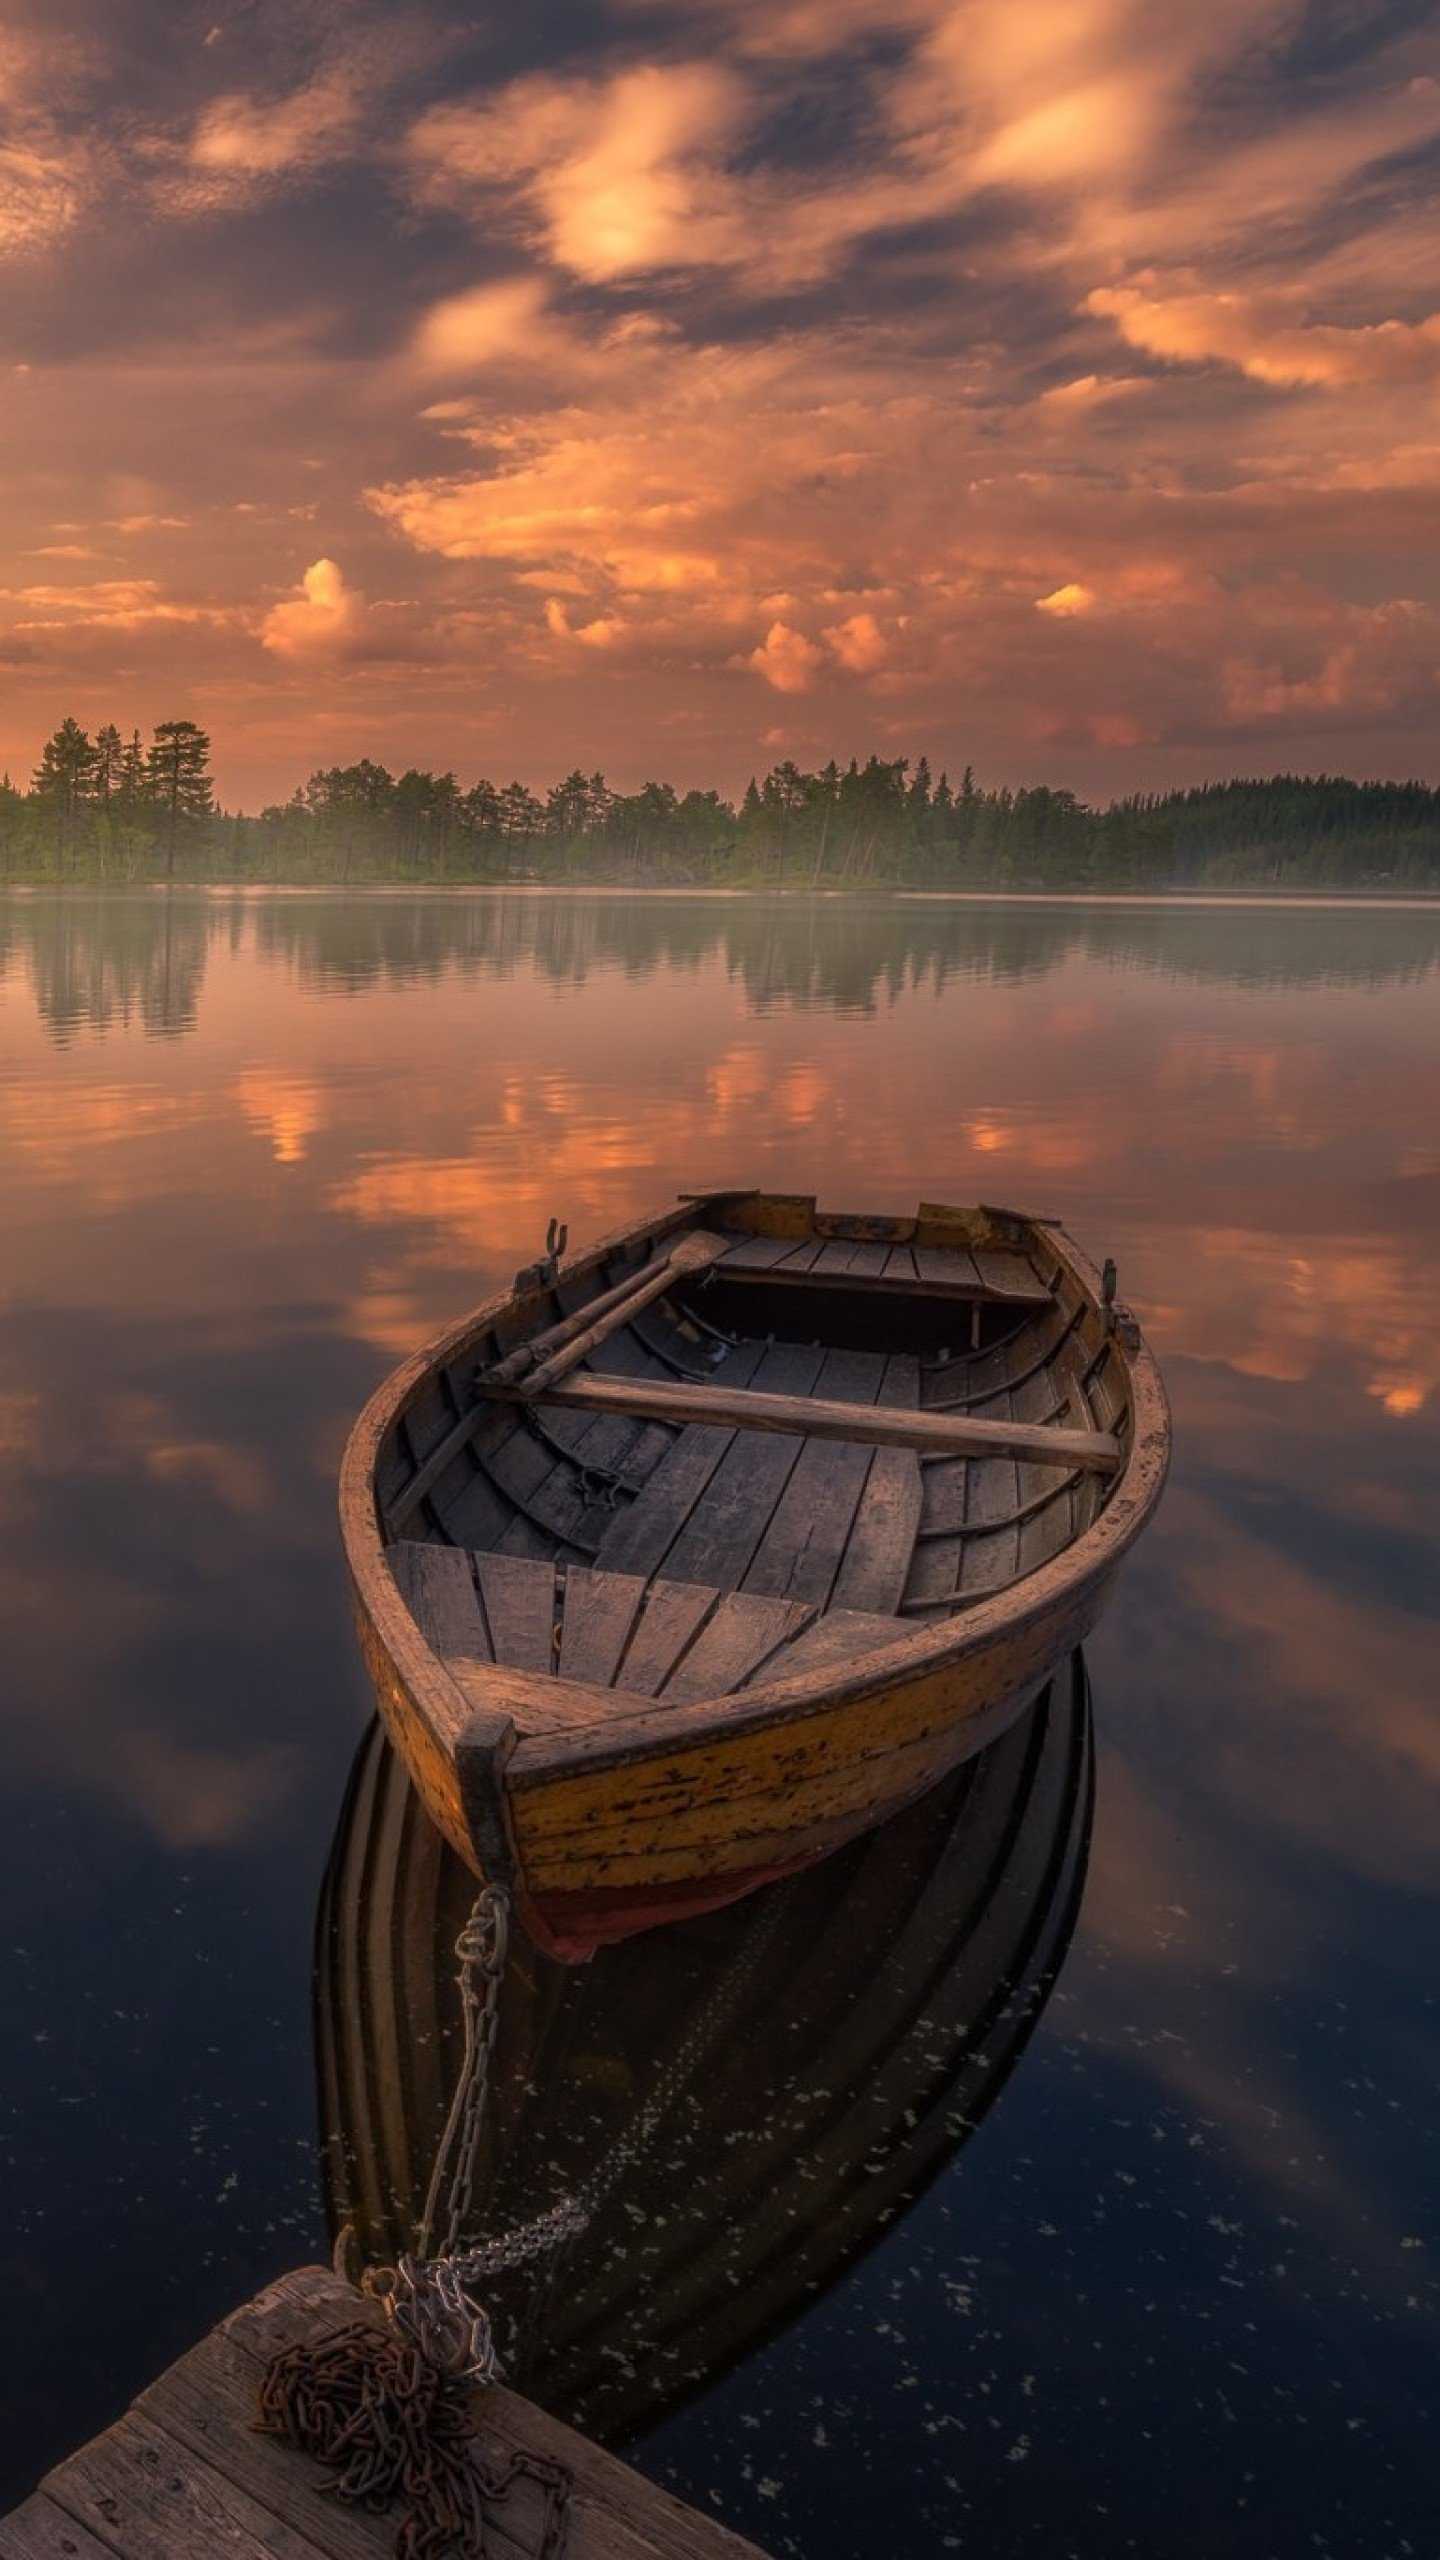 Boat in Silent Lake Nature Sunset HD Wallpaper (1440x2560)